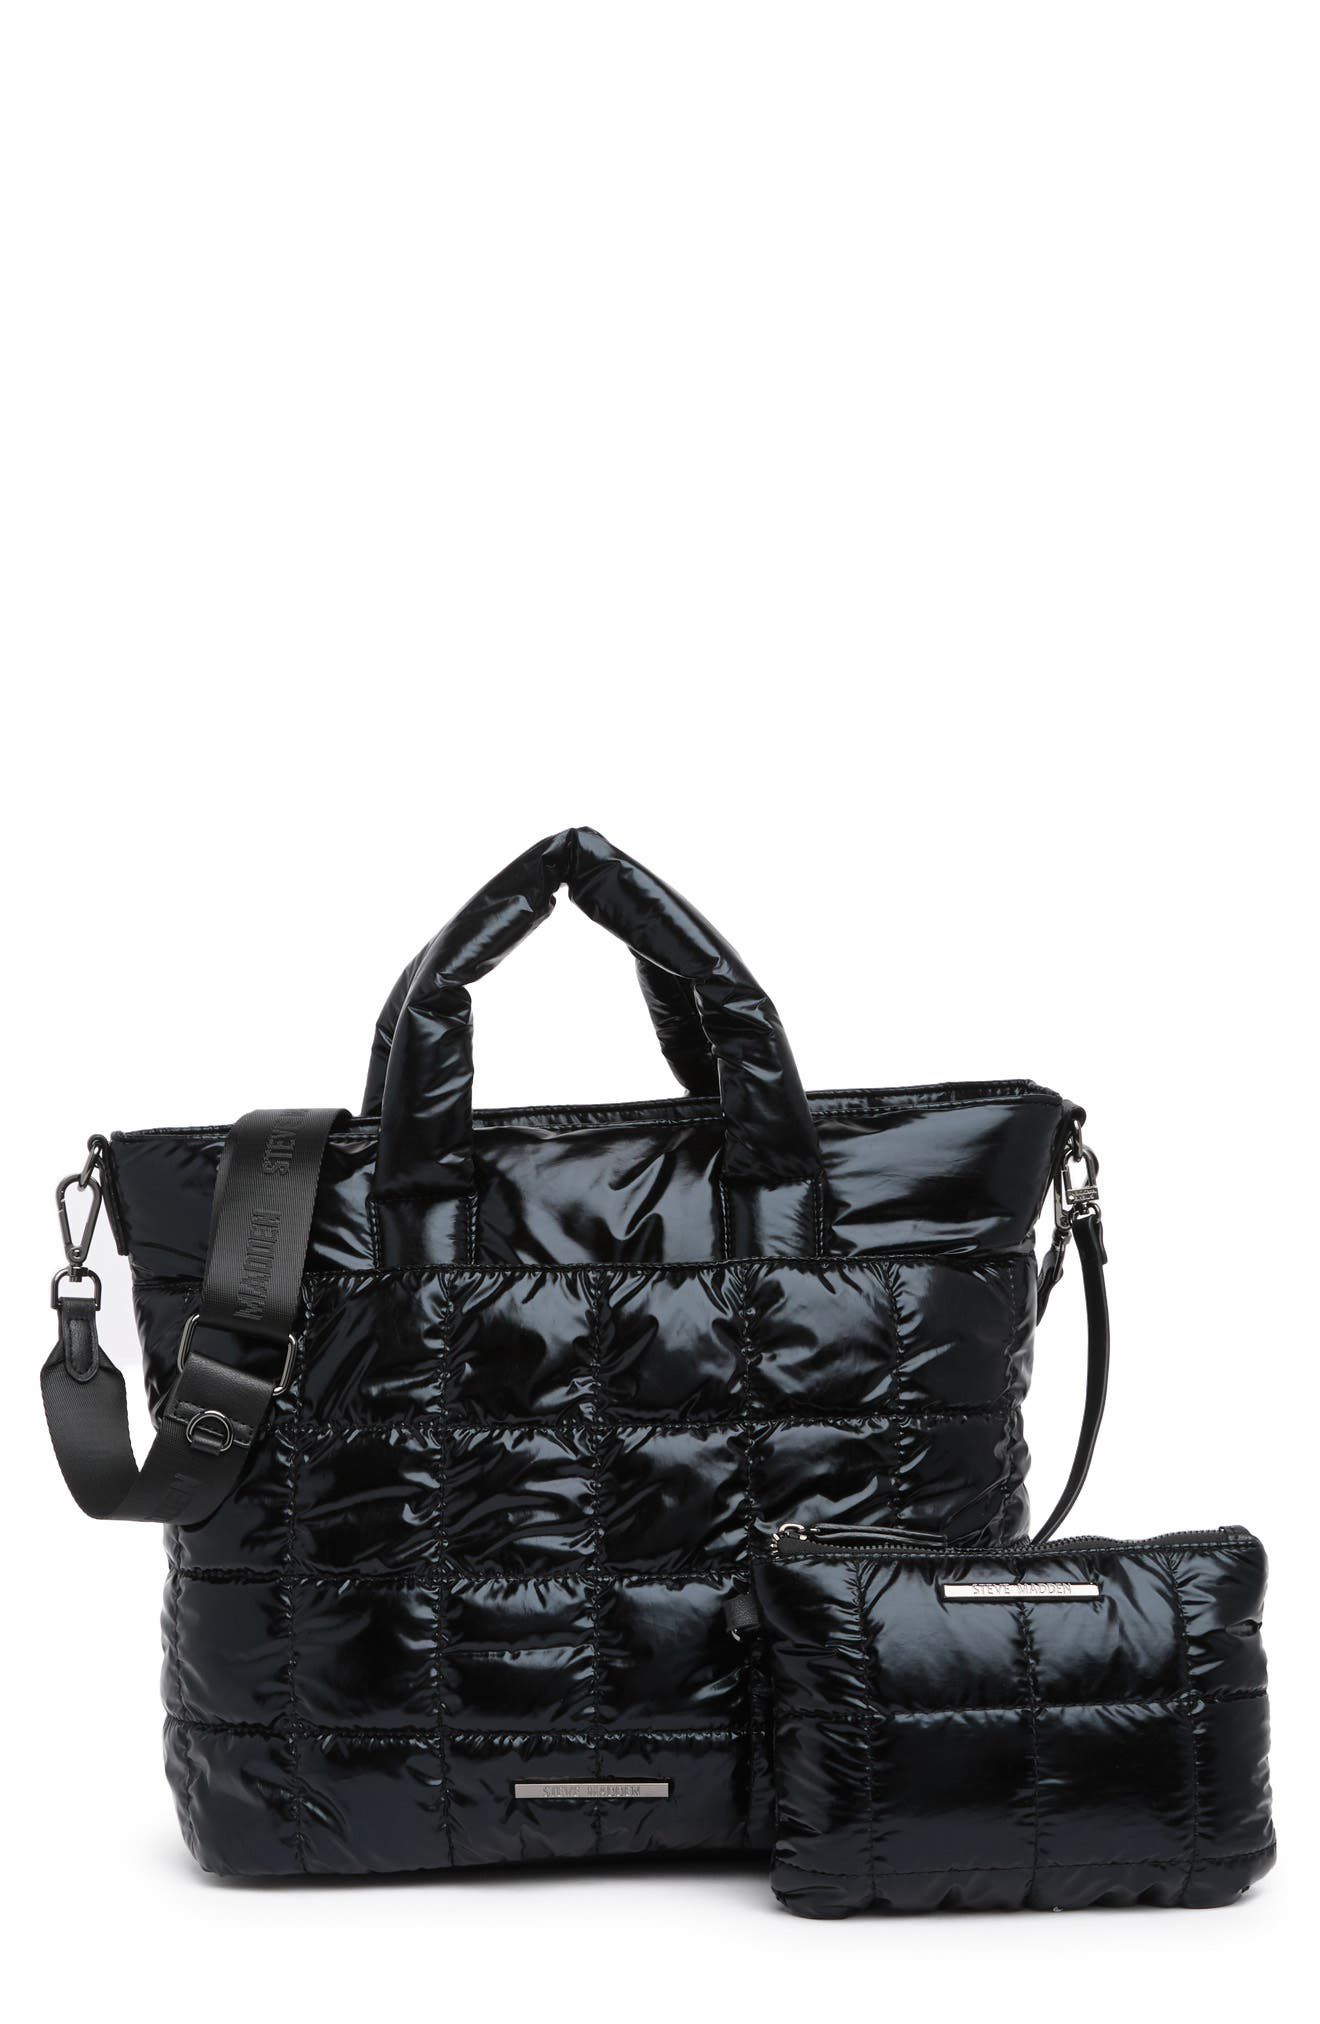 Designer Appeal: Elevating Your Look with Steve Madden Bags